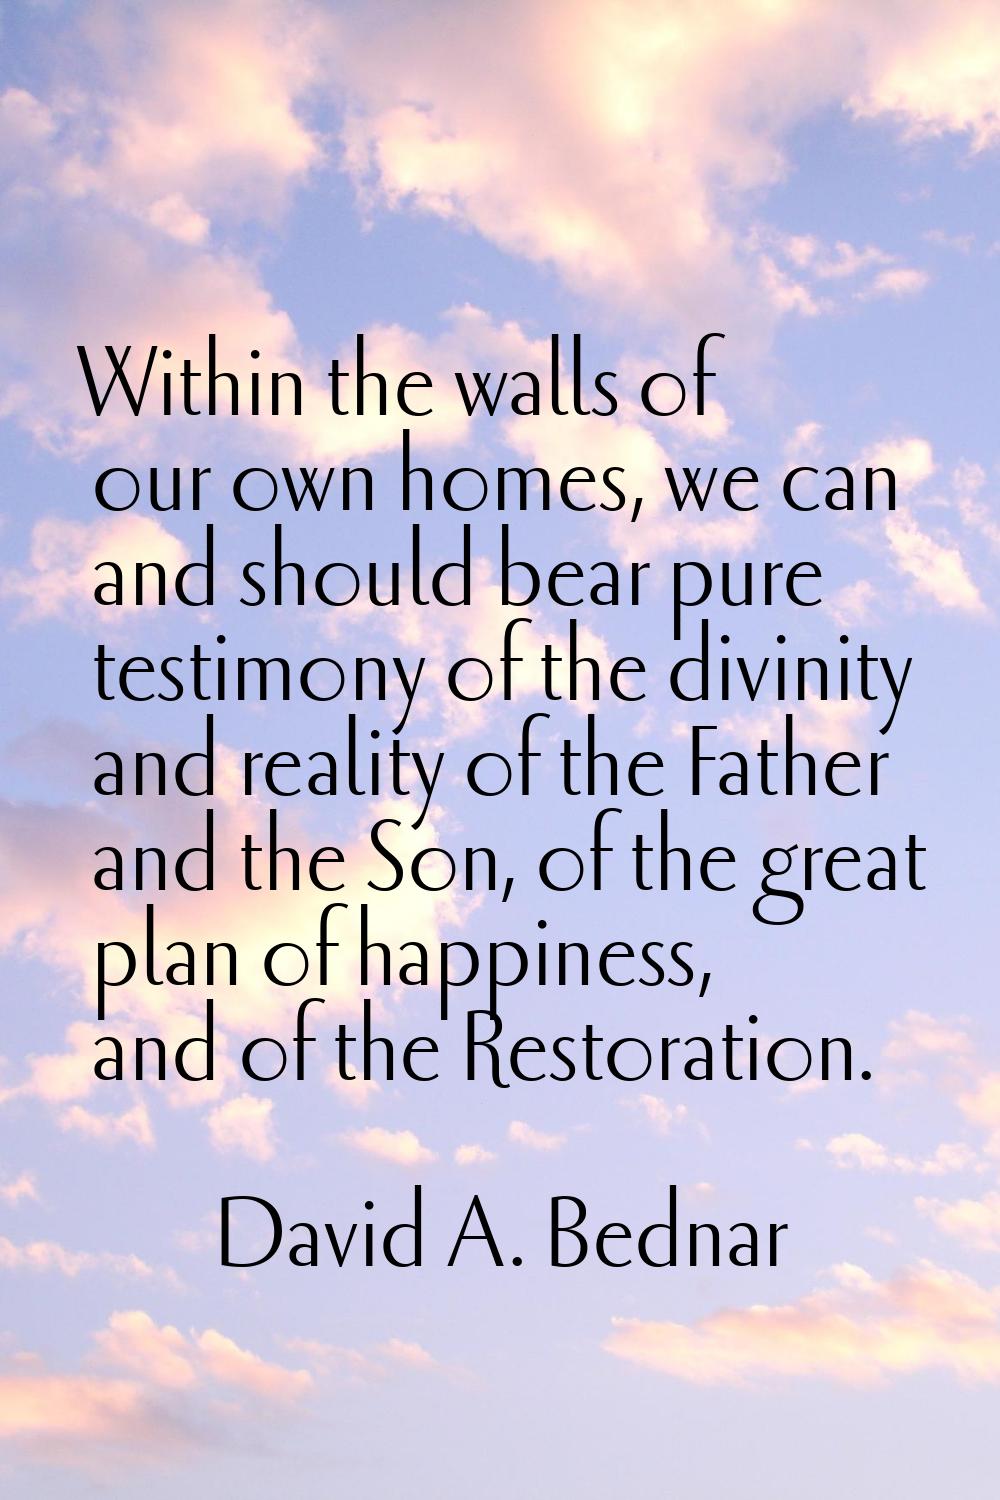 Within the walls of our own homes, we can and should bear pure testimony of the divinity and realit